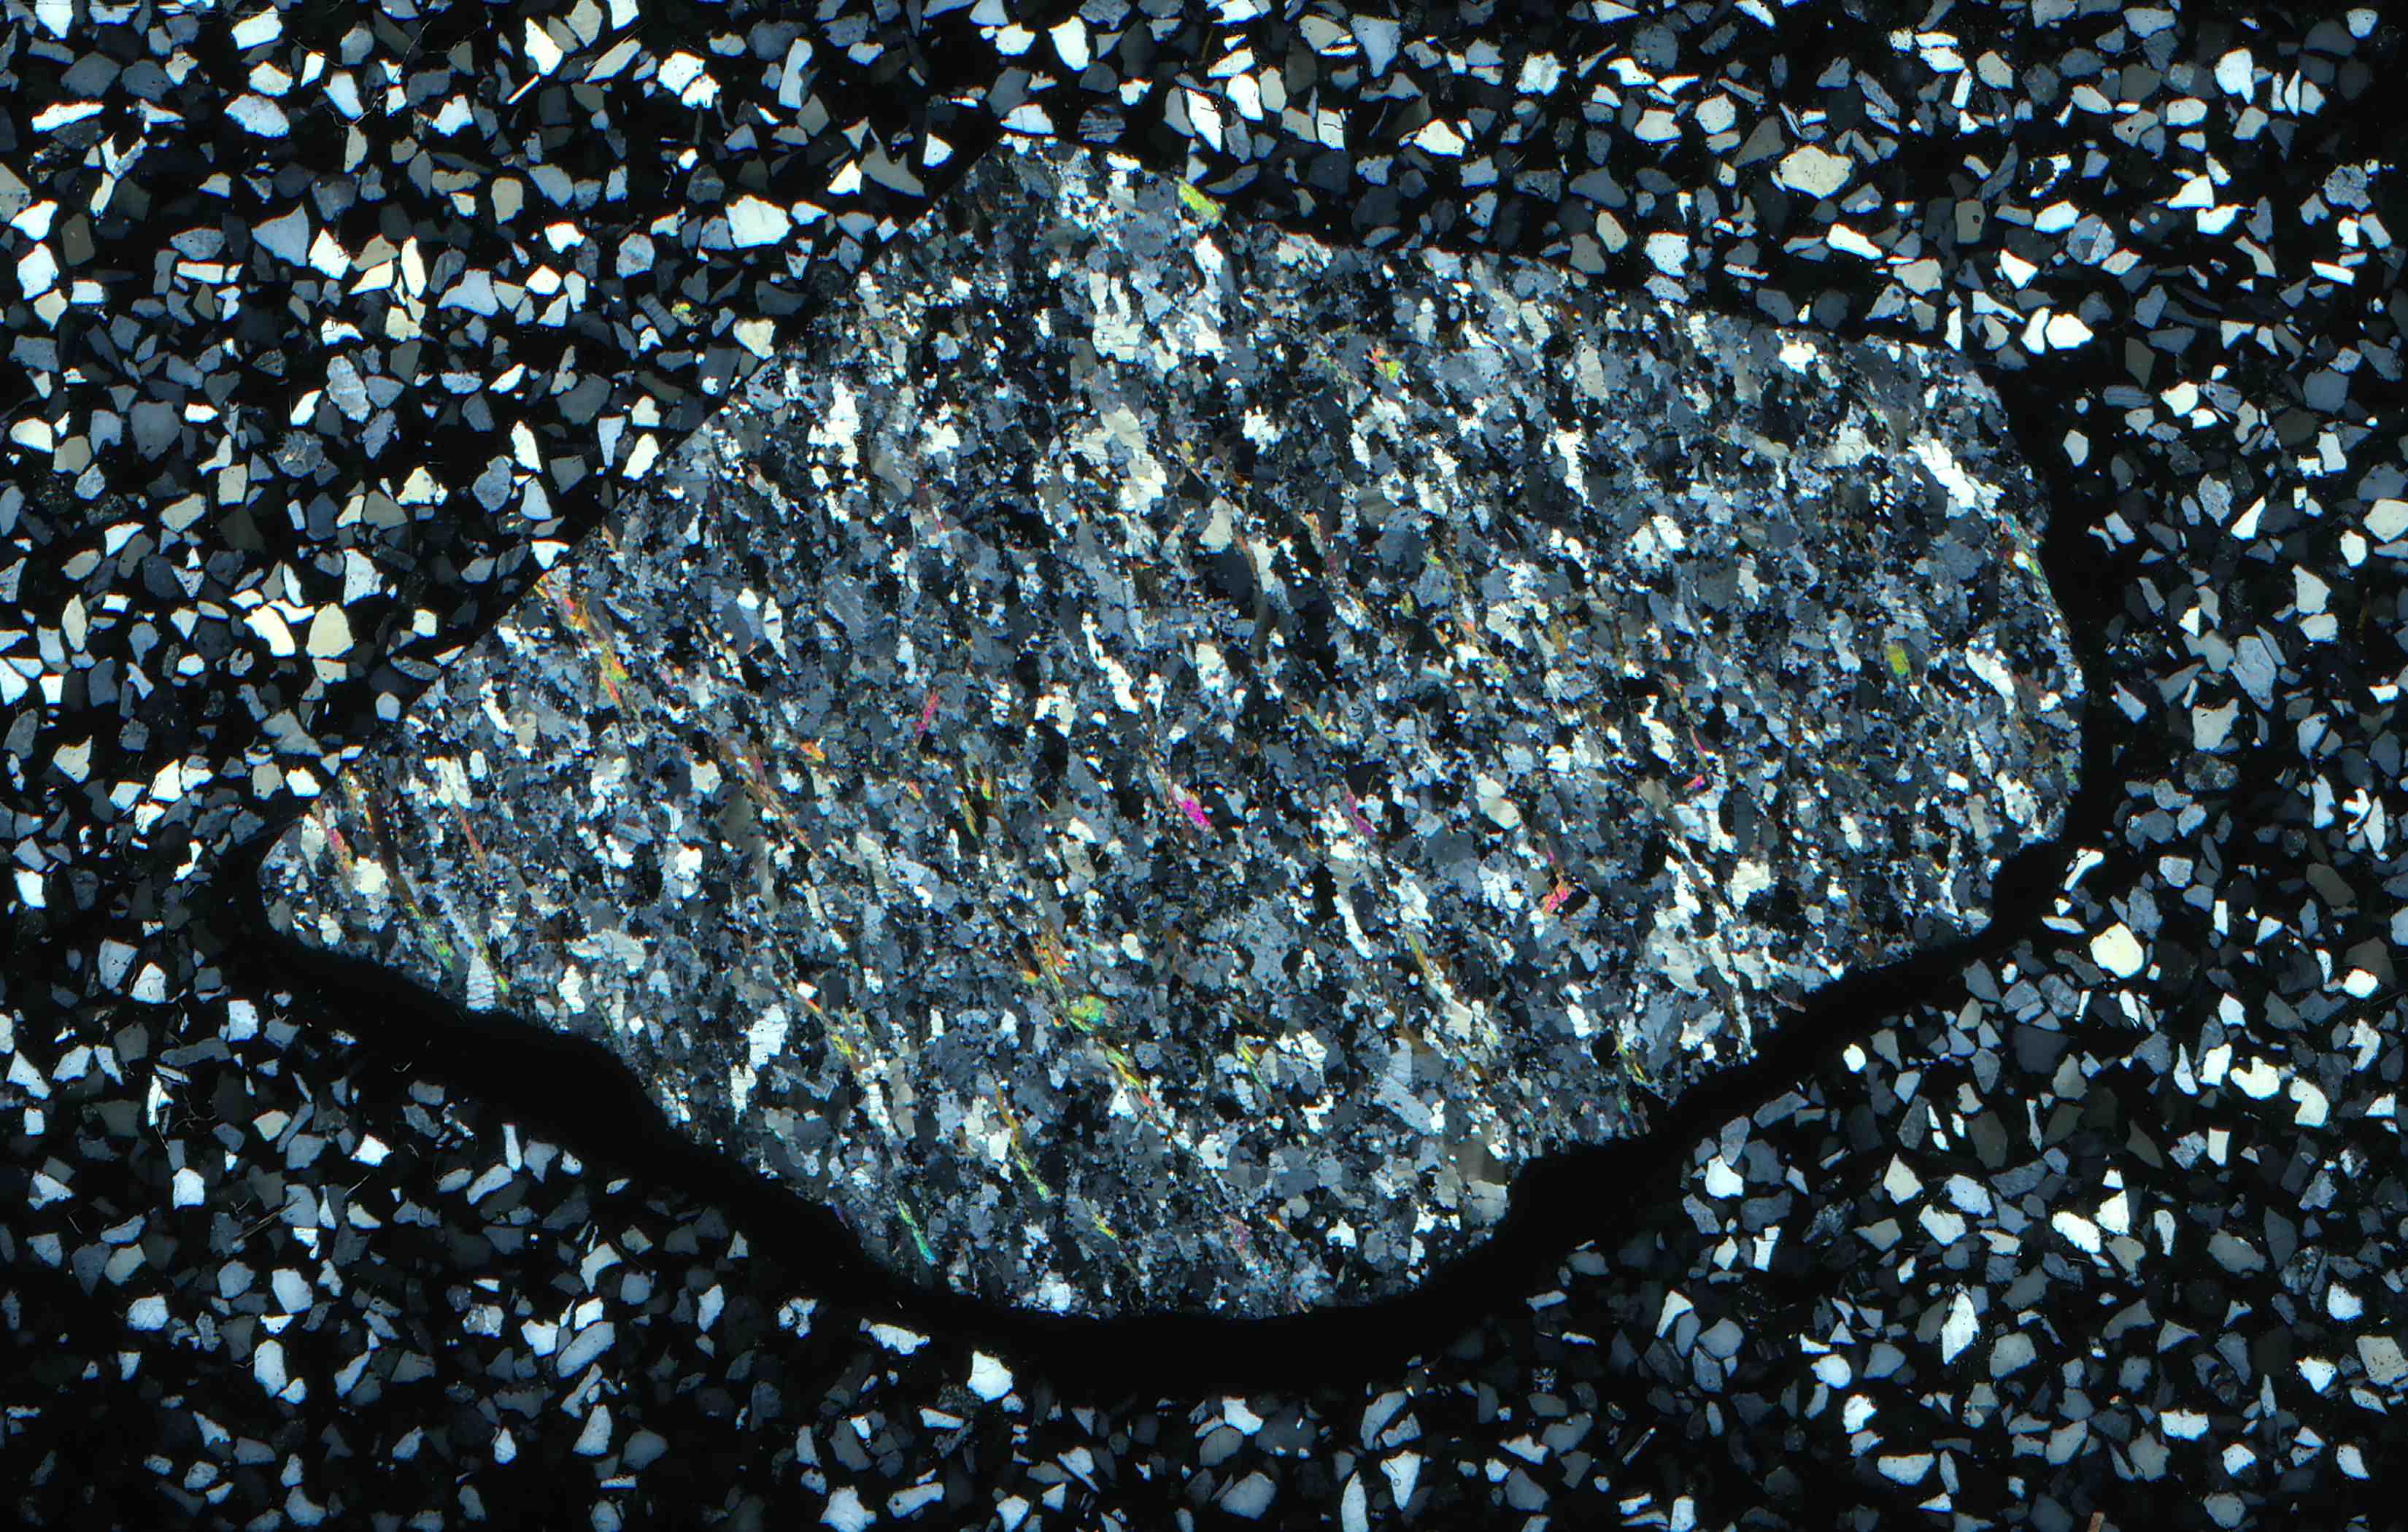 K2 azurite in thin section